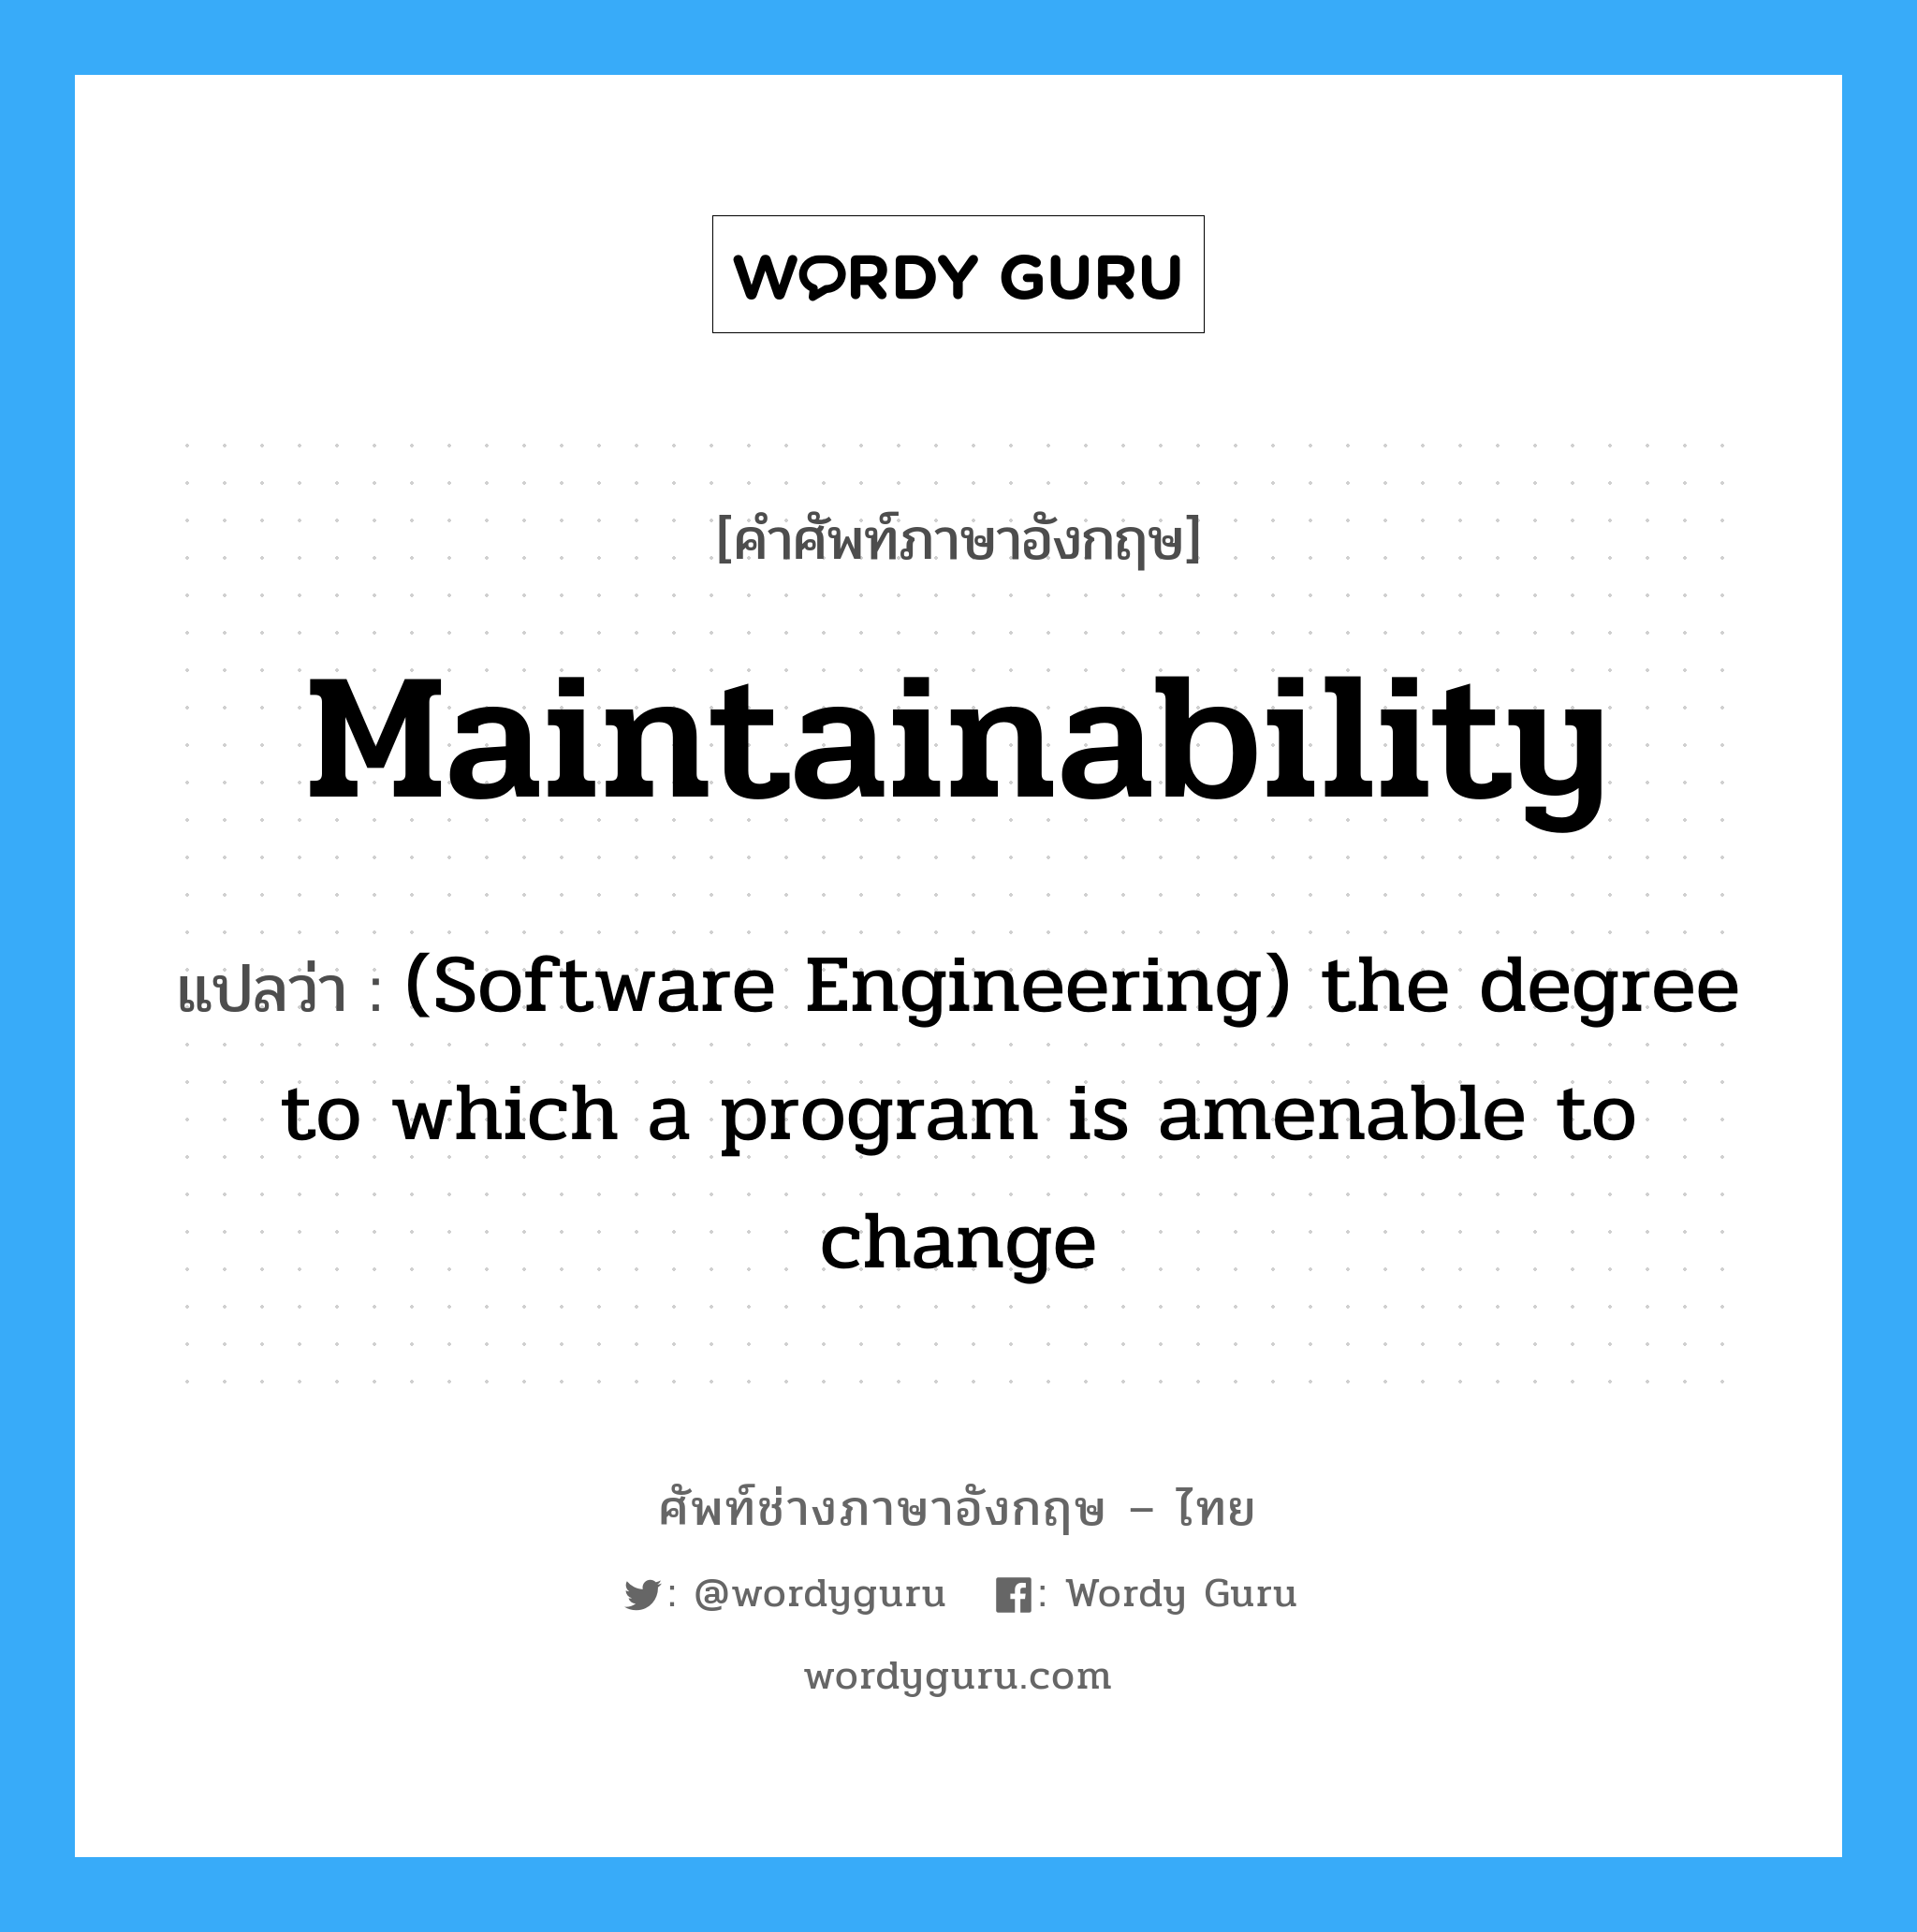 (Software Engineering) the degree to which a program is amenable to change ภาษาอังกฤษ?, คำศัพท์ช่างภาษาอังกฤษ - ไทย (Software Engineering) the degree to which a program is amenable to change คำศัพท์ภาษาอังกฤษ (Software Engineering) the degree to which a program is amenable to change แปลว่า Maintainability